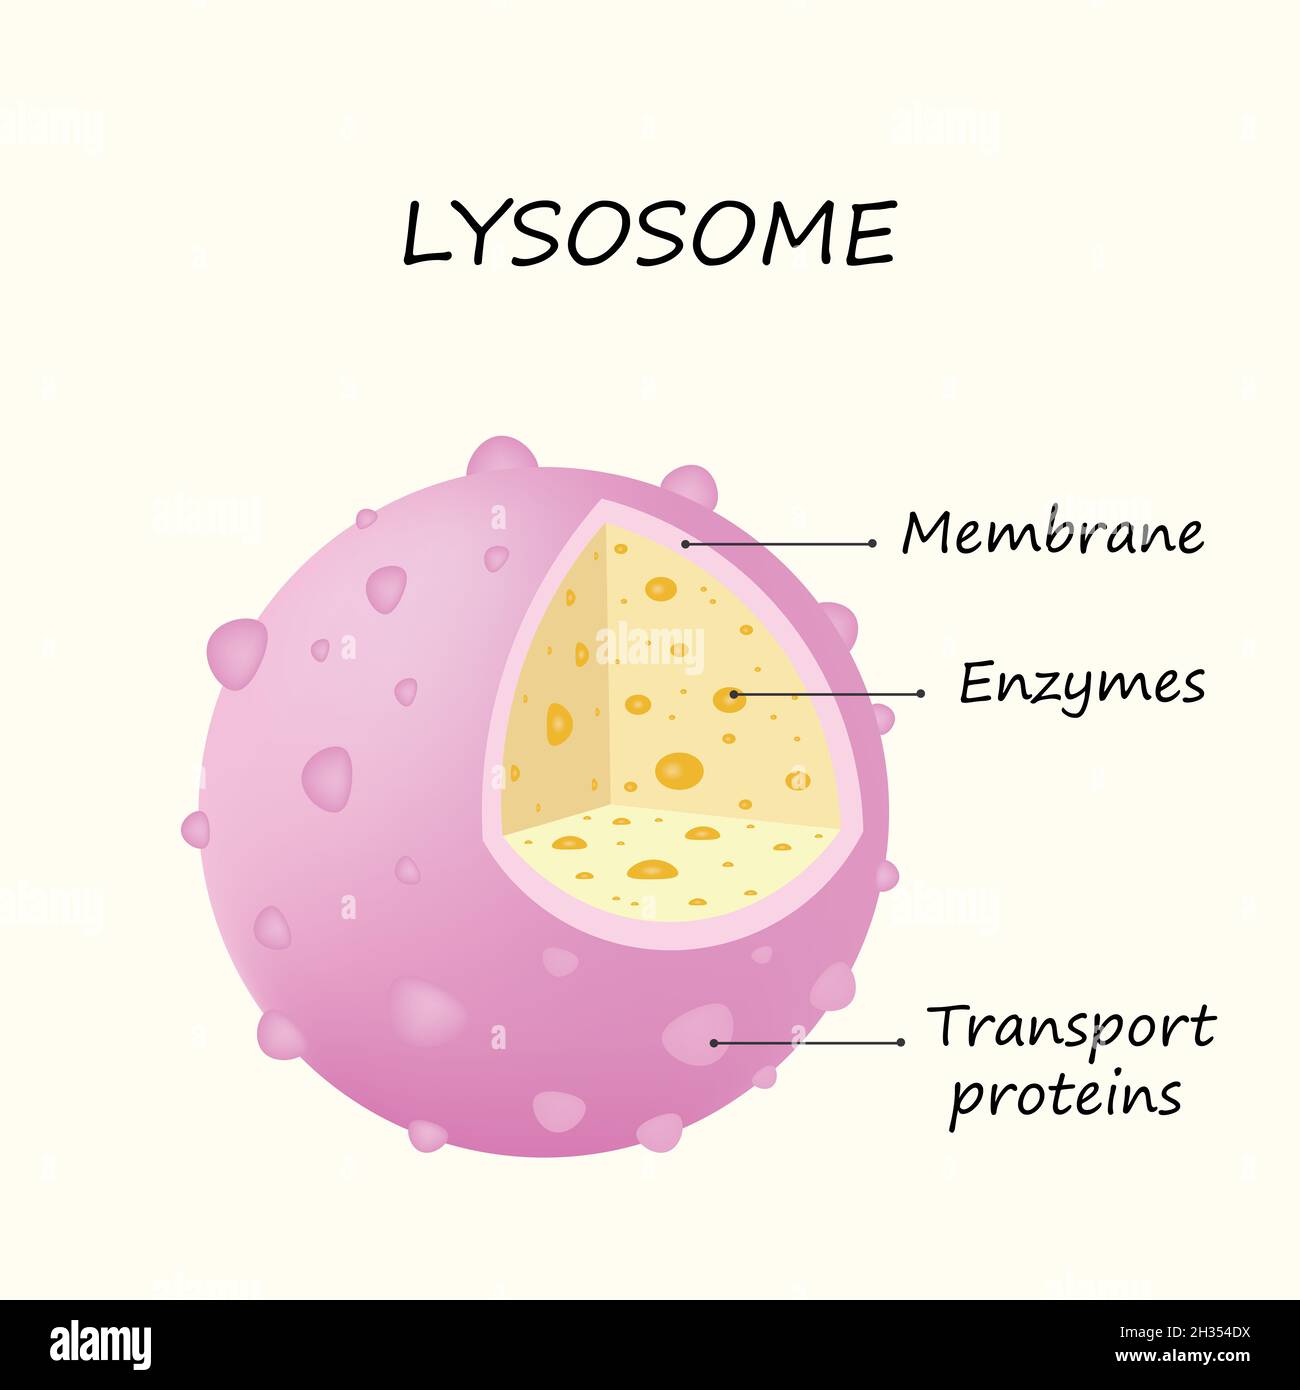 Anatomy of the Lysosome: Hydrolytic enzymes, Membrane and transport proteins colorful illustration Stock Photo